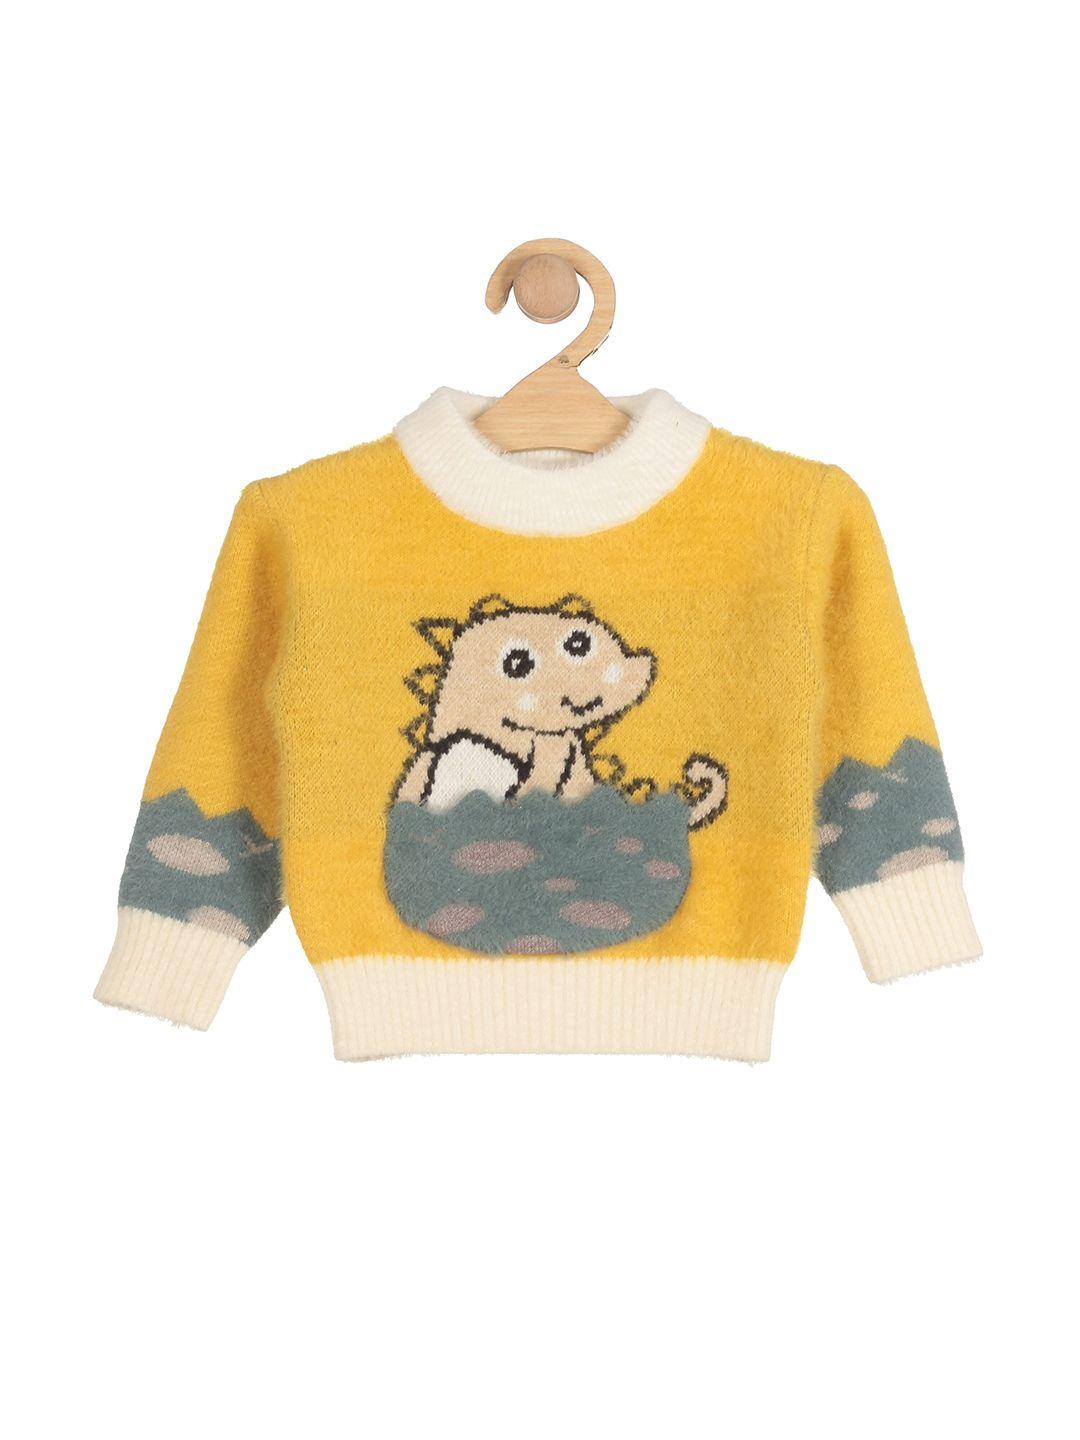 lil-lollipop-unisex-kids-mustard-&-off-white-printed-pullover-with-fuzzy-detail